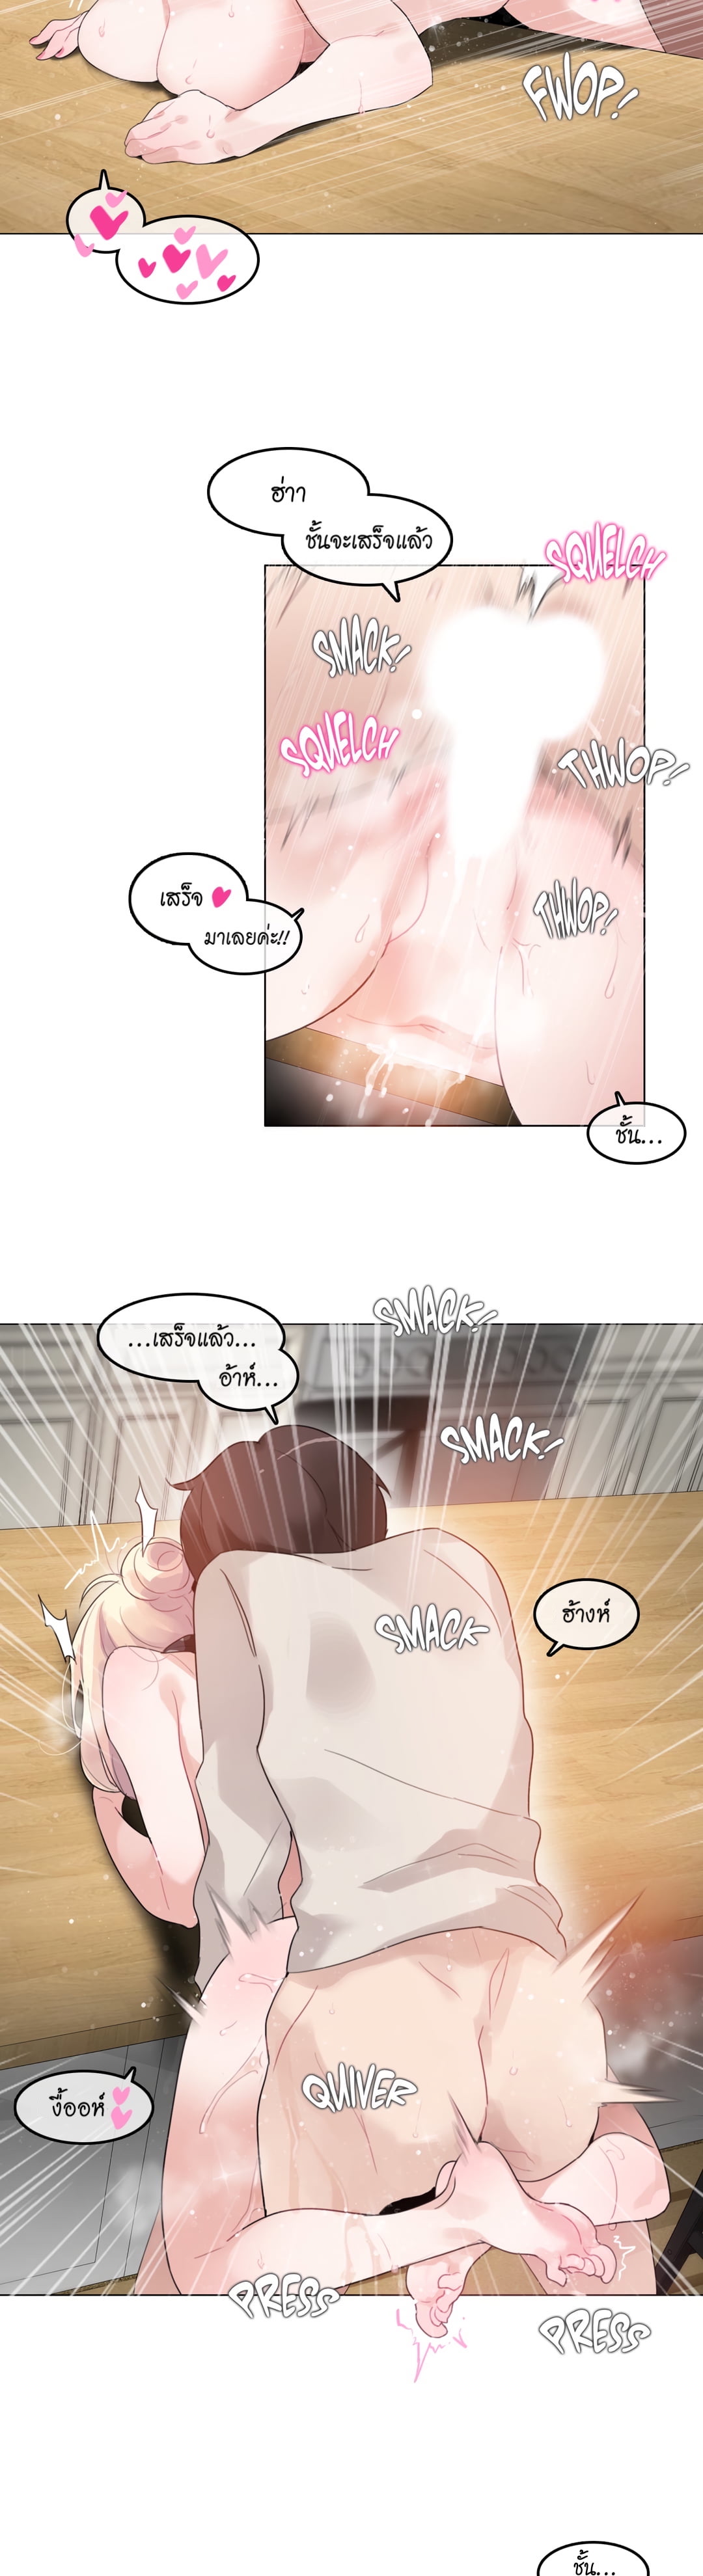 A Pervert’s Daily Life57 (11)